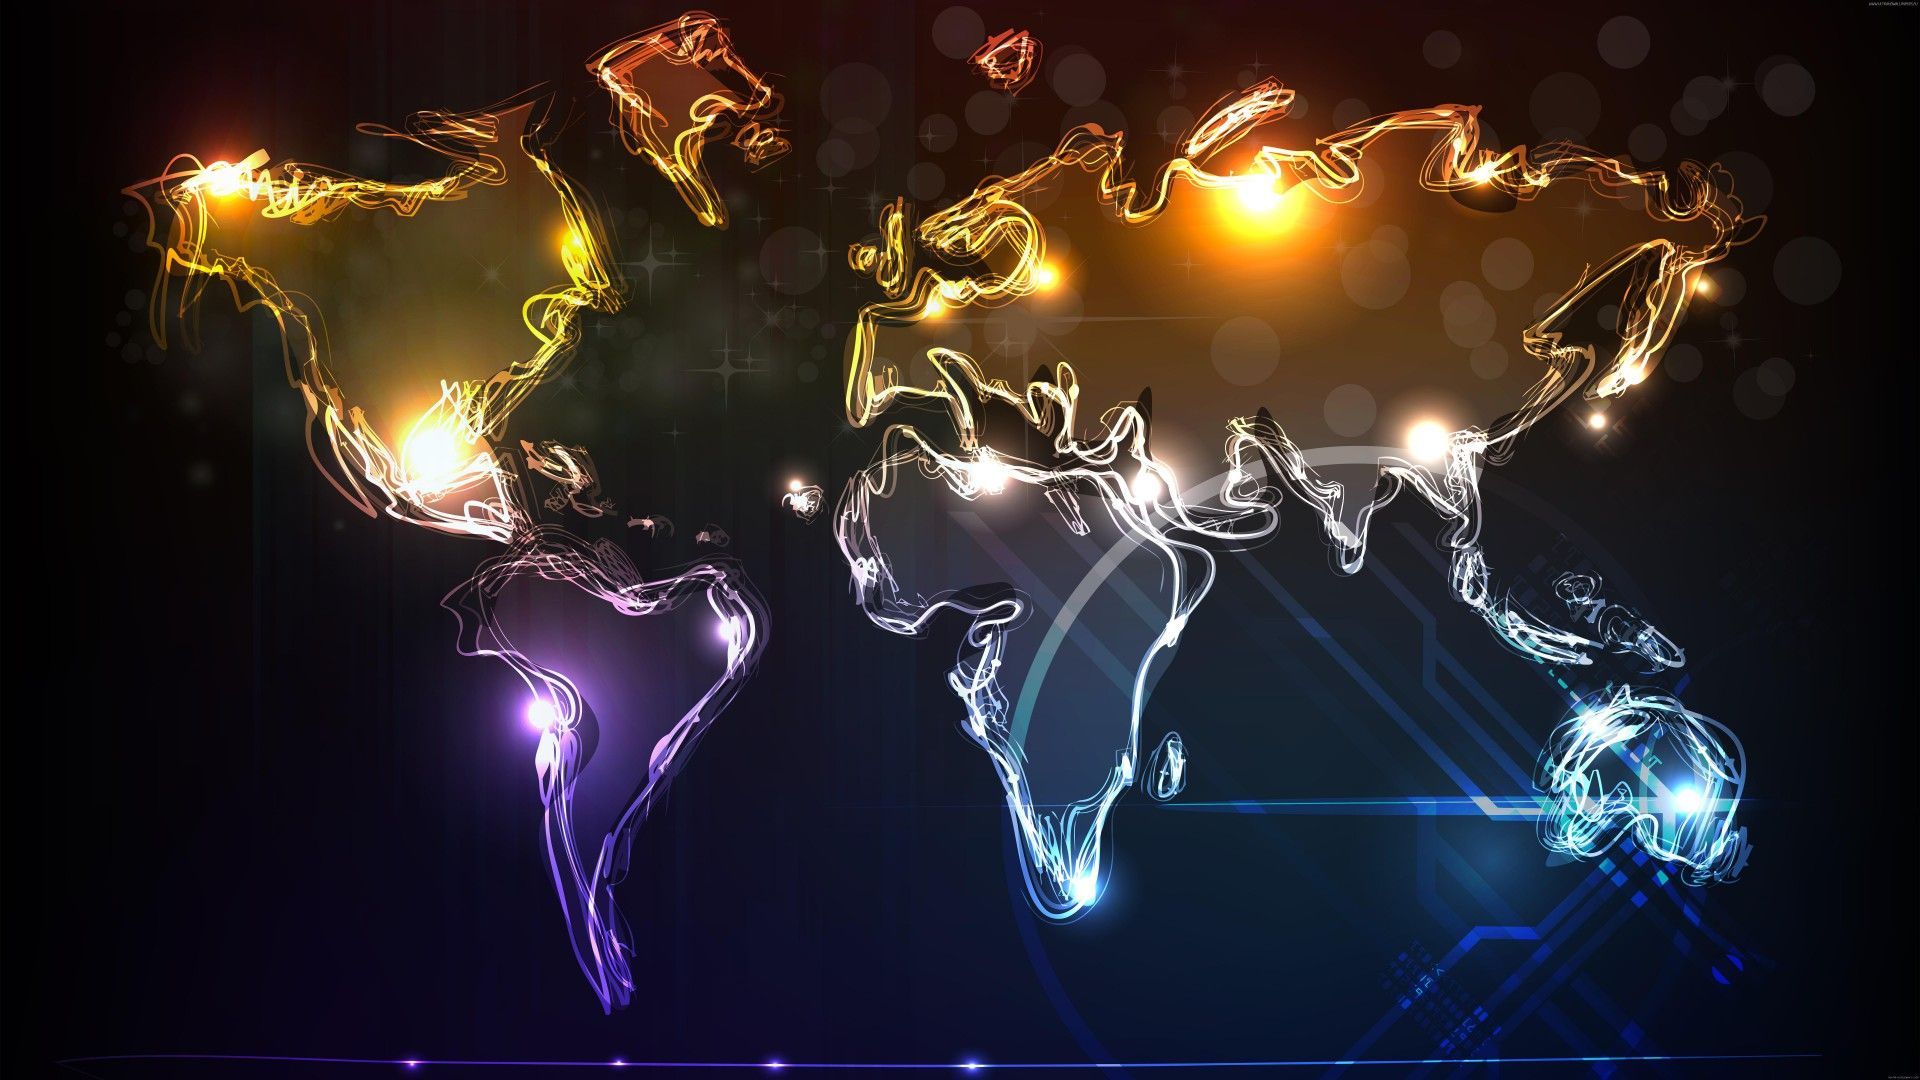 World map Wallpaper, Our Choice: World map, neon, lights. World map wallpaper, Digital wallpaper, 3840x2160 wallpaper